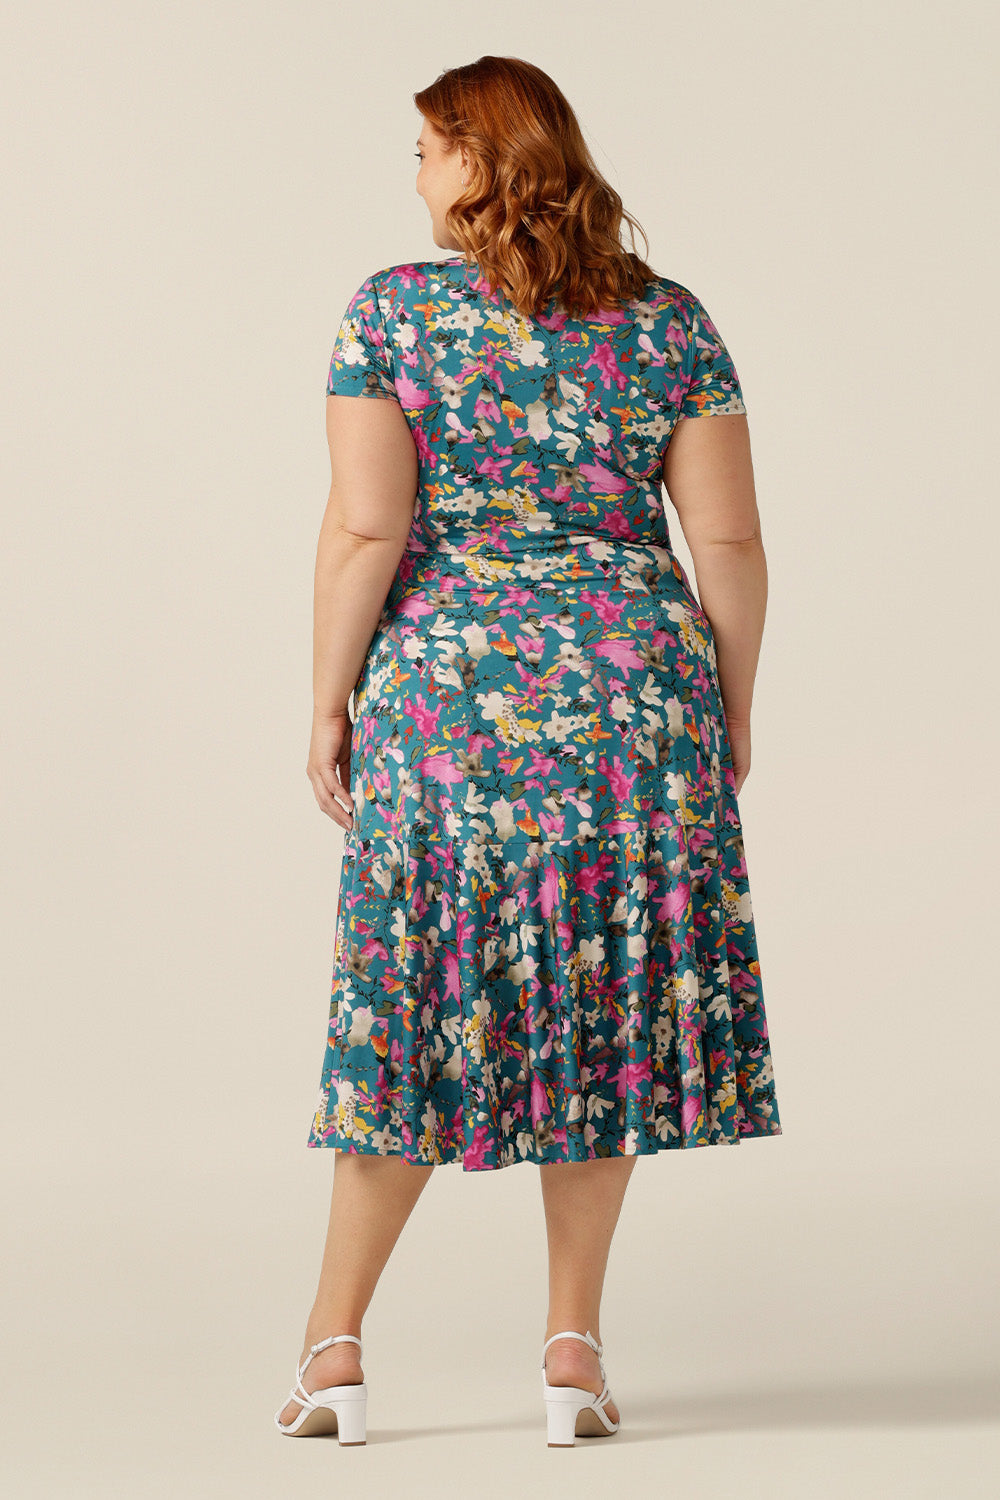 A plus size woman wearing a fixed wrap jersey dress with short sleeves and a floral print. The dress features a maxi-length skirt with pockets. Made in Australia by women's clothing brand L&F, this wrap dress fits petite to curvy women.